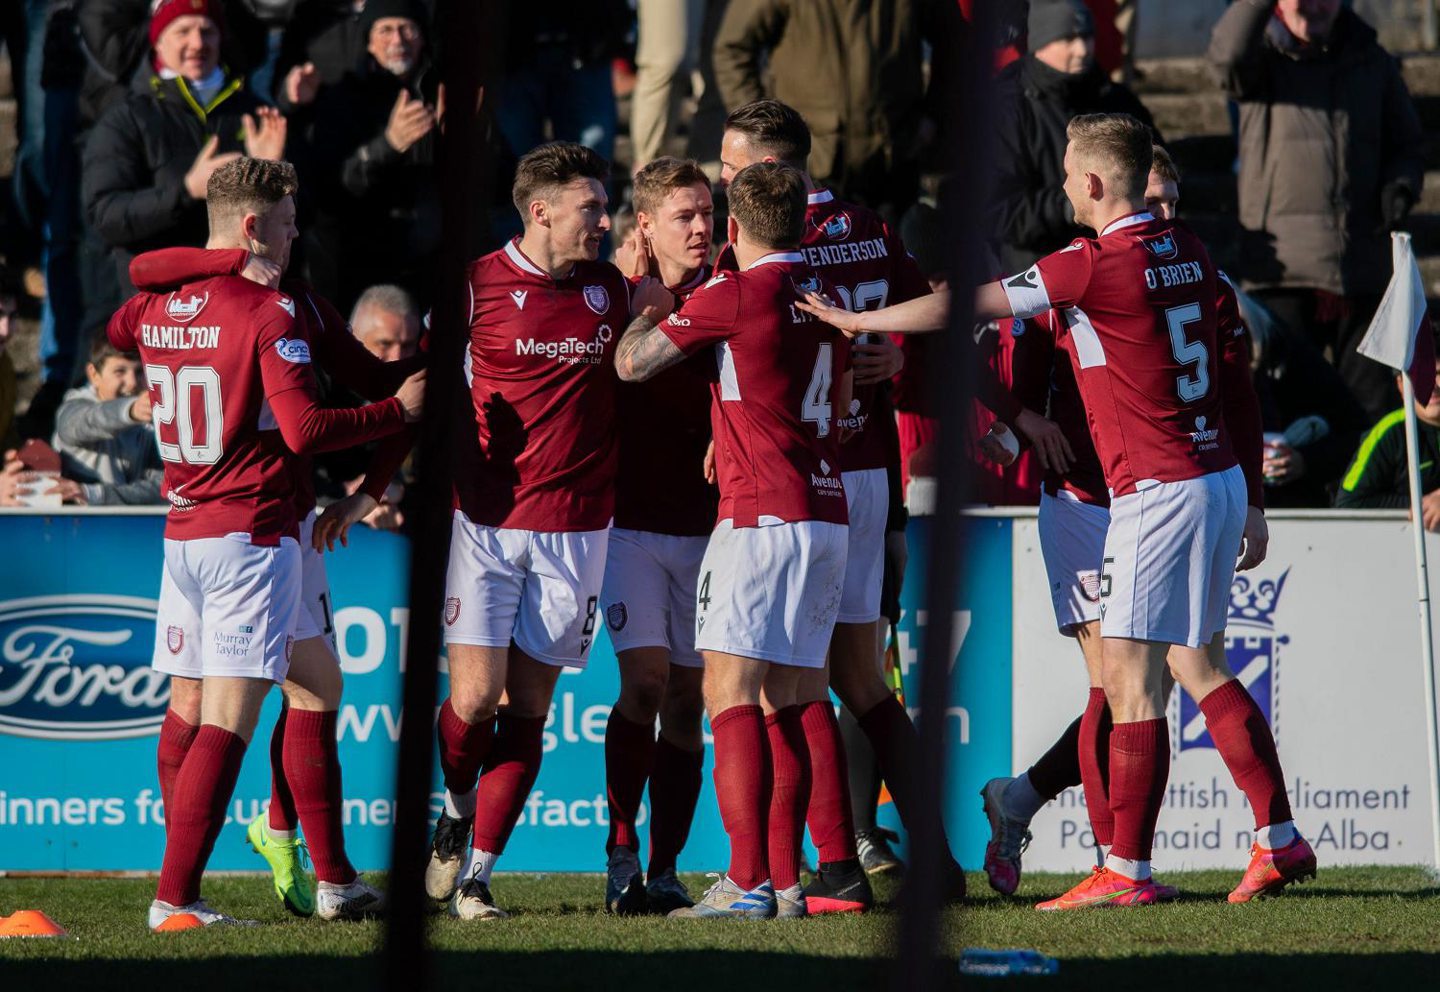 Arbroath's 2022/23 season begins in the group stages of the Premier Sports Cup.